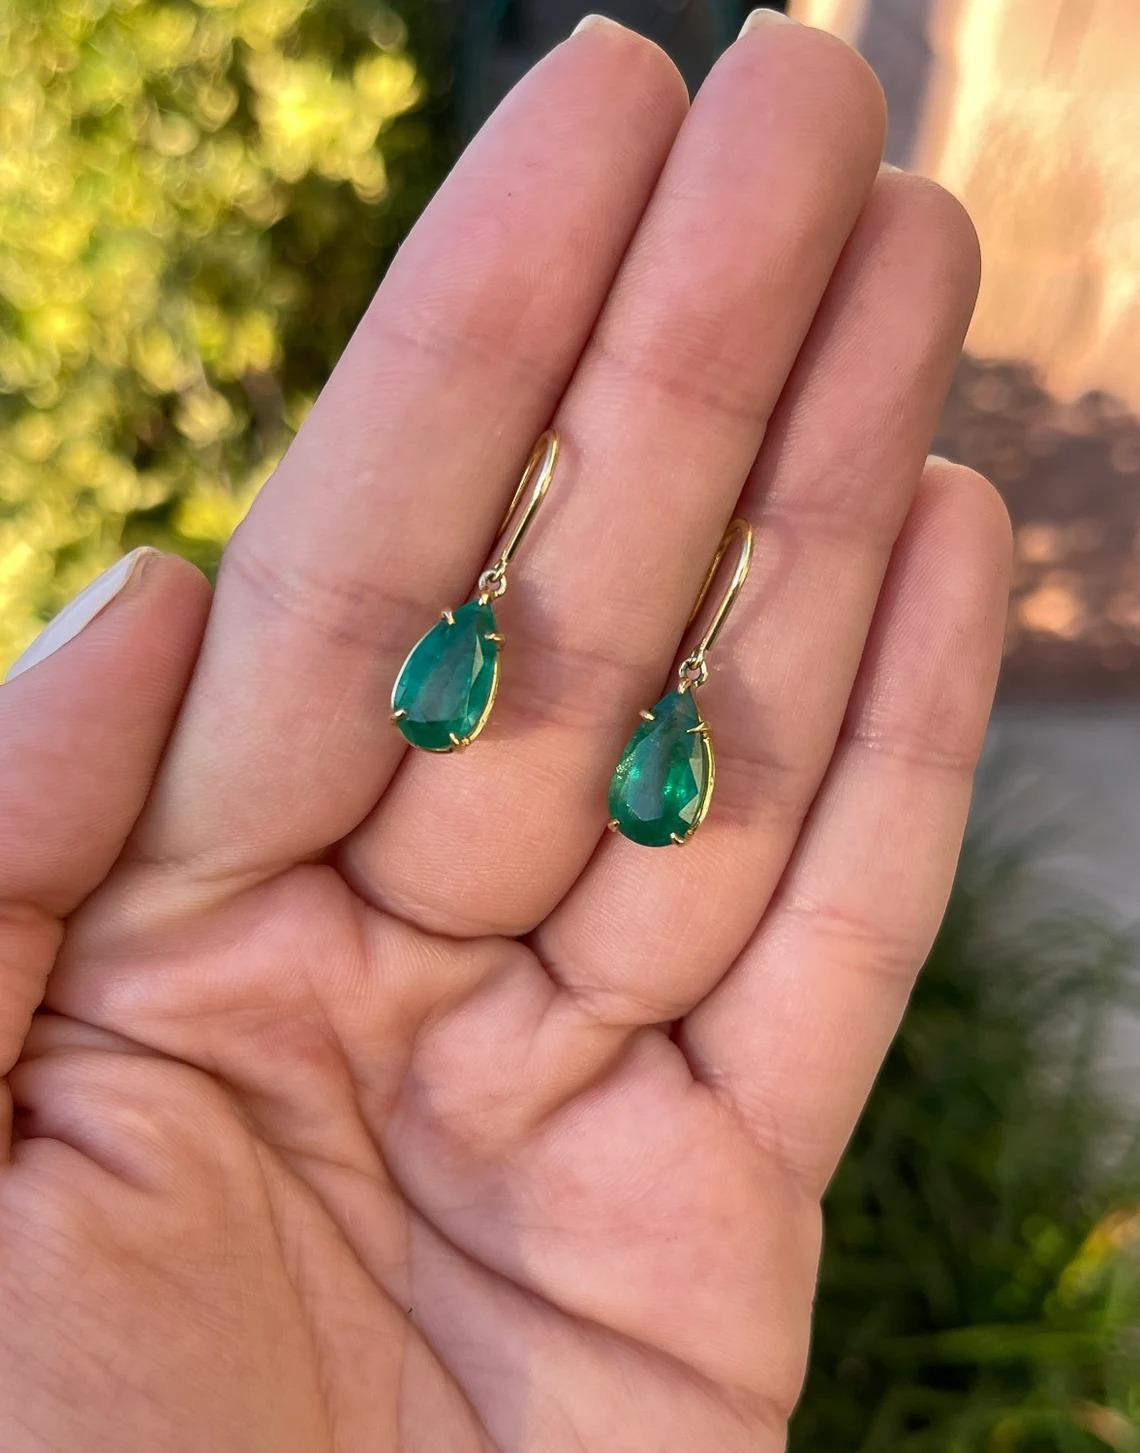 Modern 5.0tcw 18K Natural Lush Dark Green Pear 4 Prong Solitaire Dangle Hook Earrings For Sale